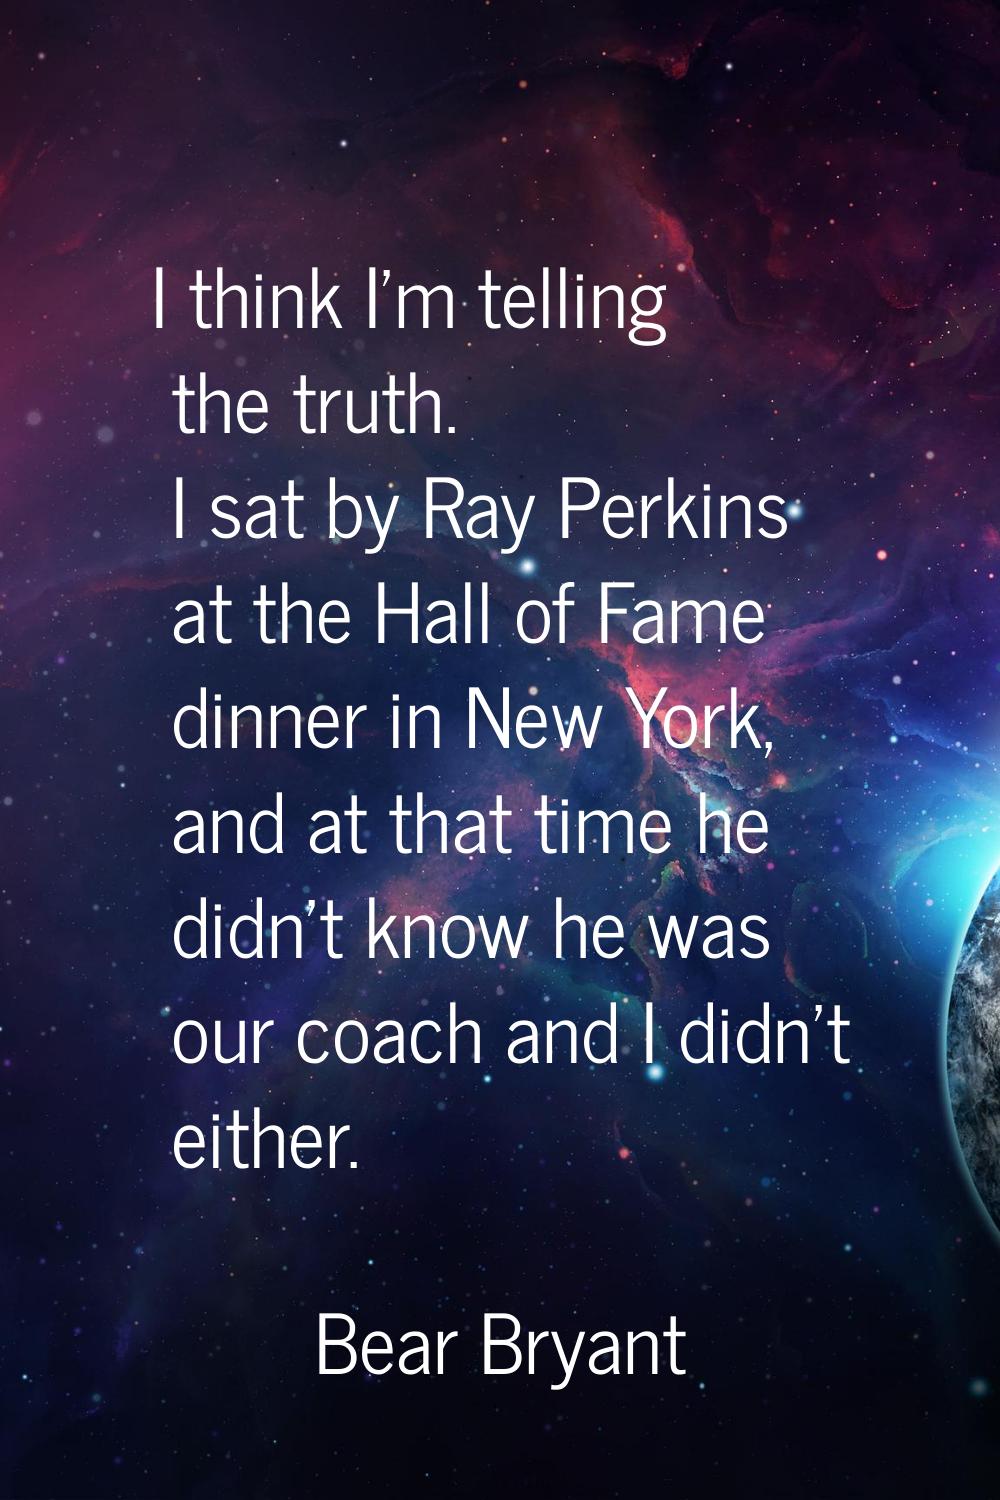 I think I'm telling the truth. I sat by Ray Perkins at the Hall of Fame dinner in New York, and at 